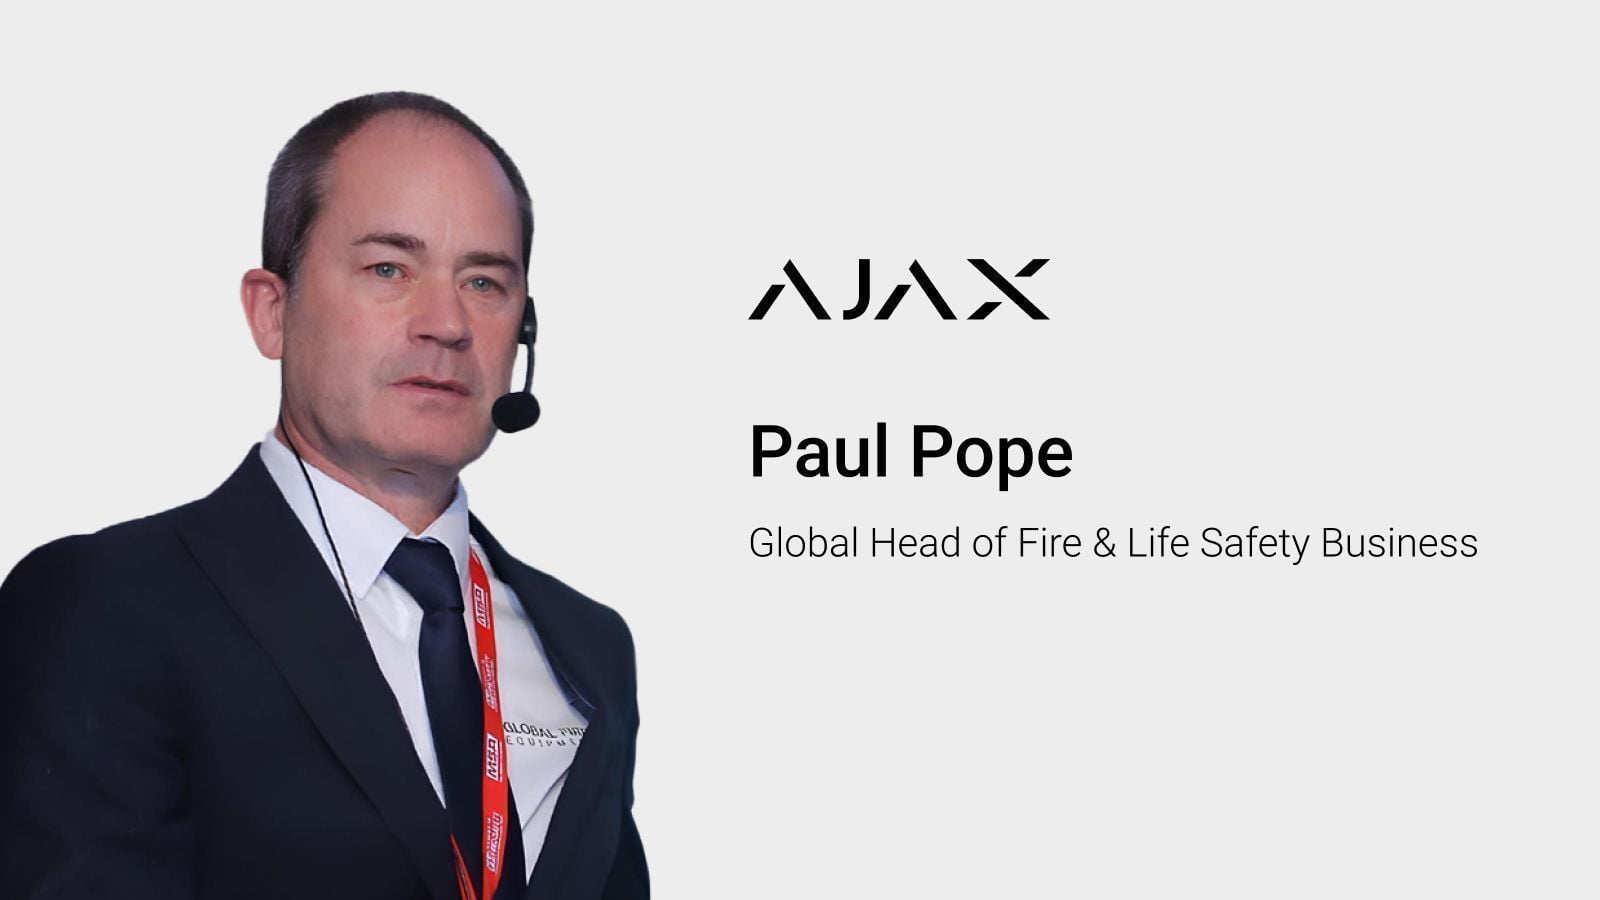 New Global Head of Fire & Life Safety Business alert: Paul Pope joins Ajax Systems